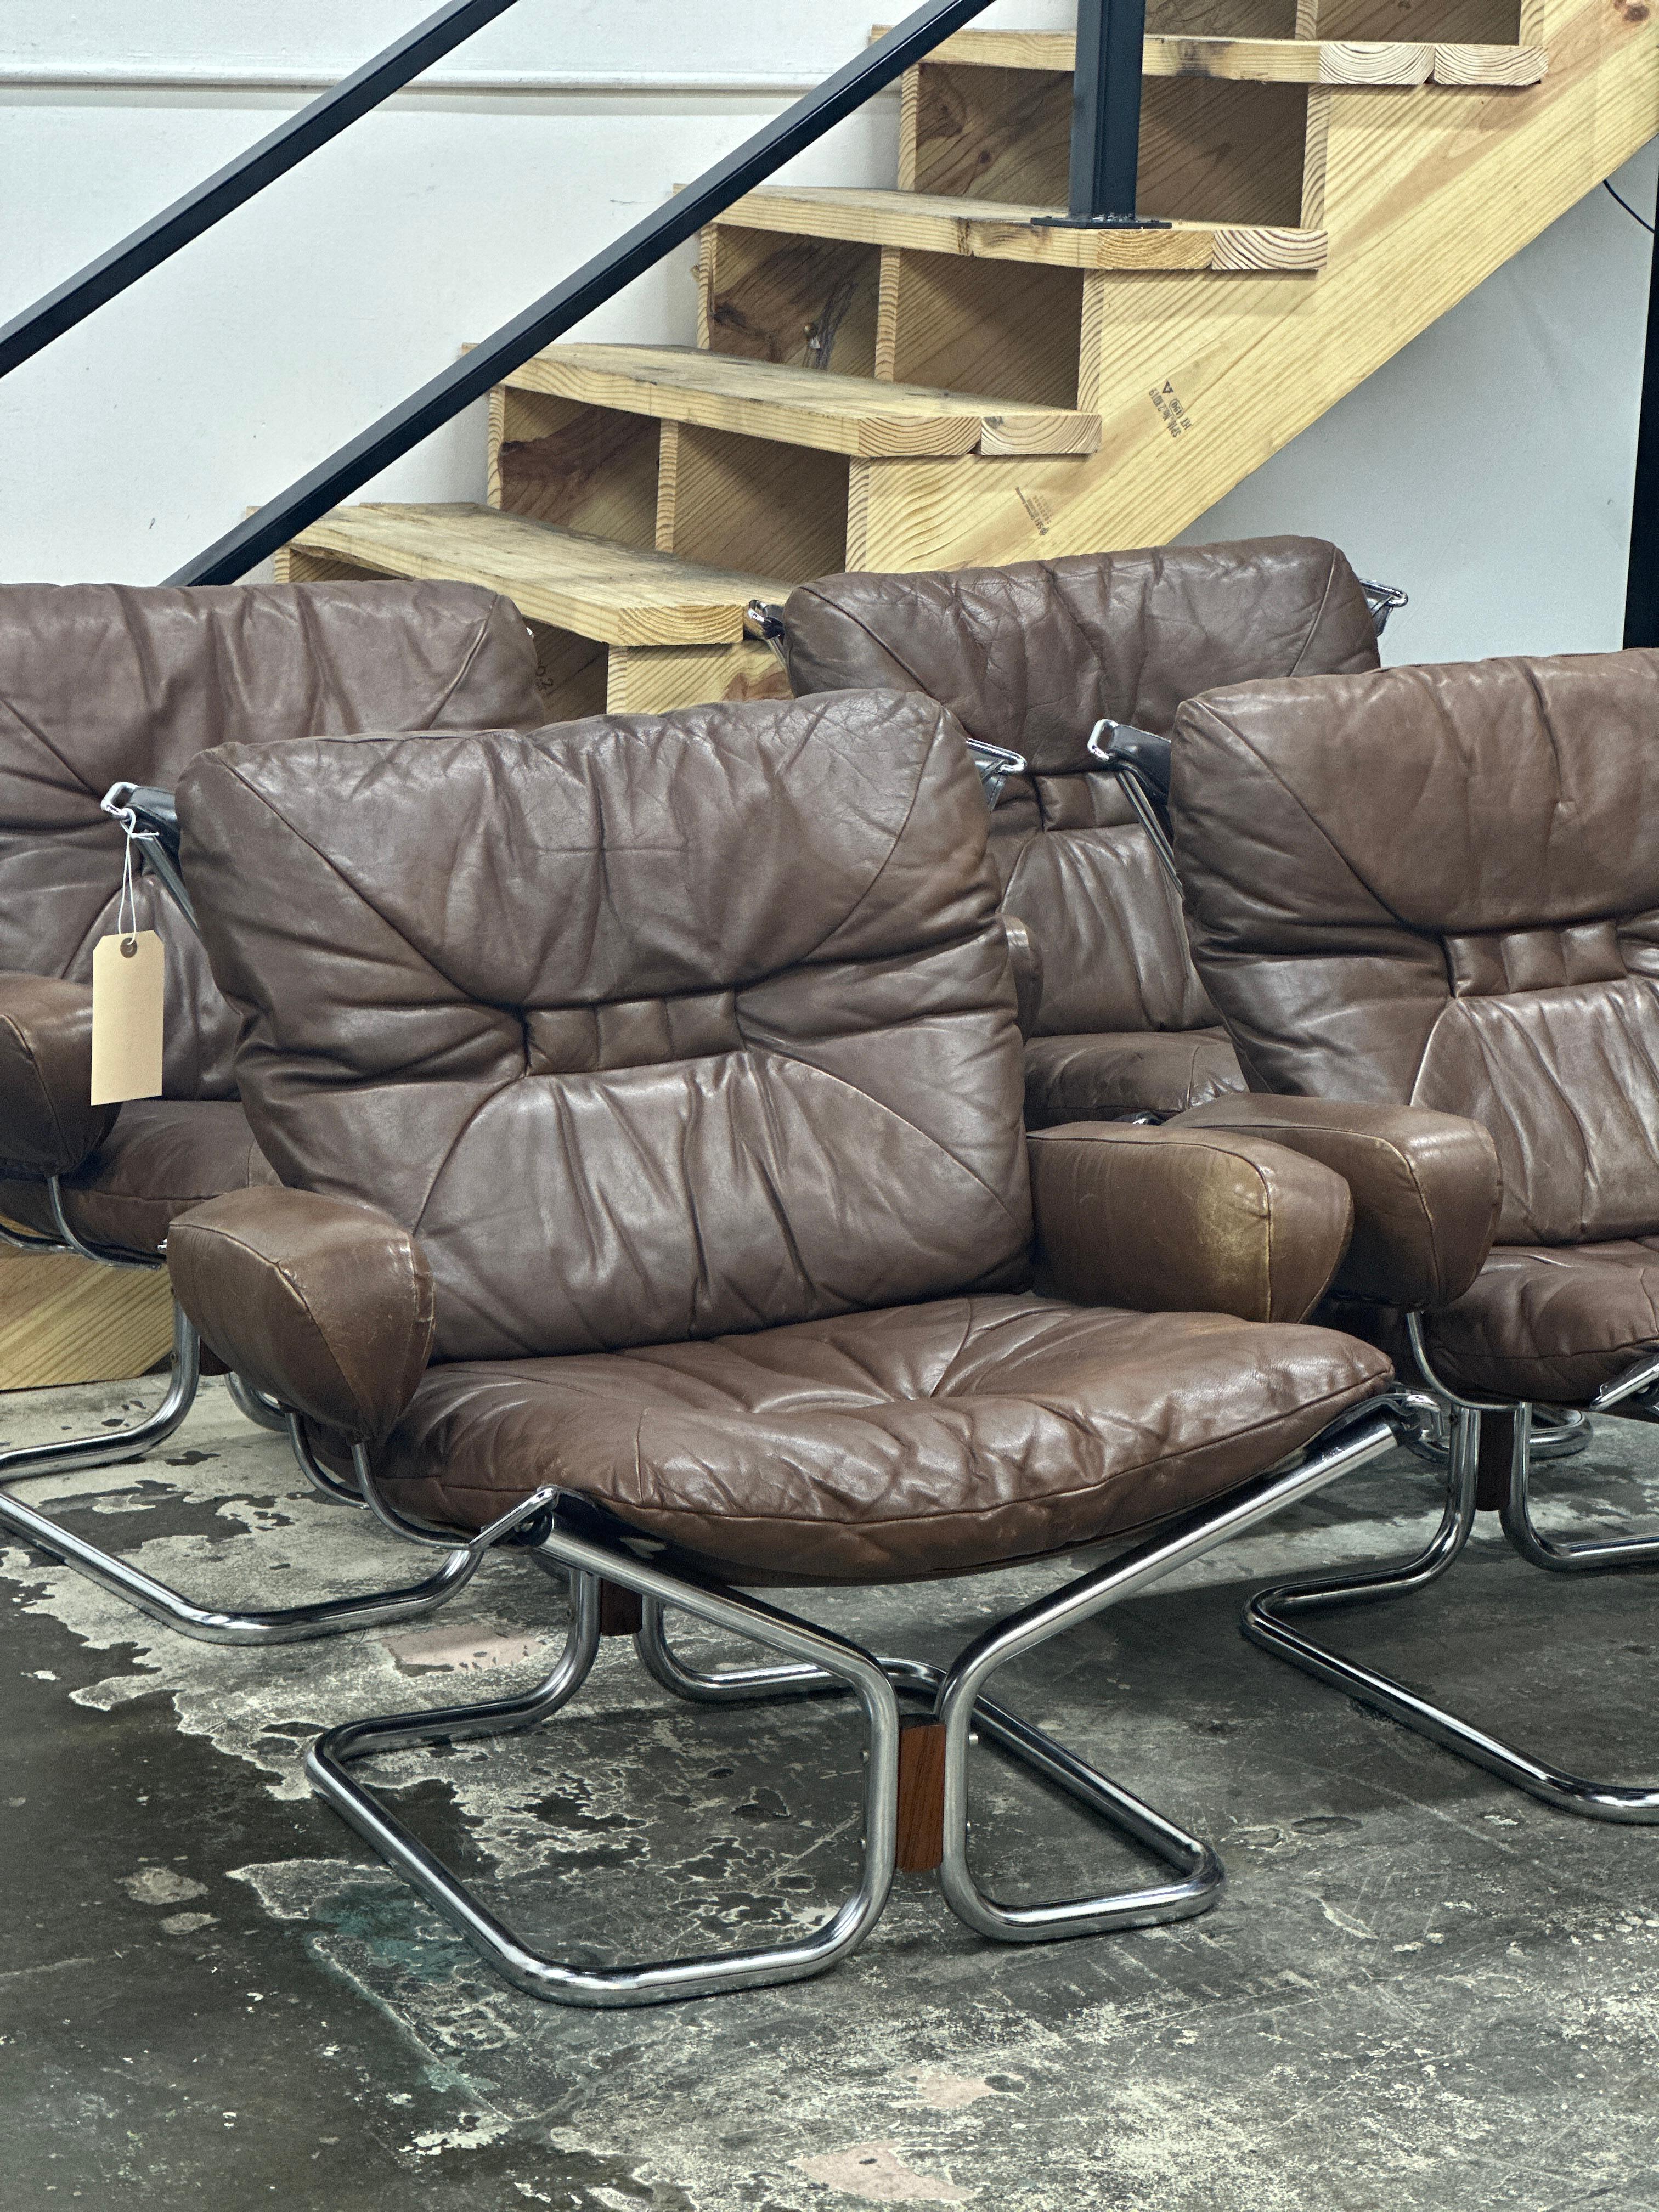 Leather armchair by Harald Relling and made by Westnofa. each chair has minor wear, and the leather is extremely soft. No rust nor pitting on chrome.

Listing is for ONE chair. No ottoman. 

Four total chairs available.